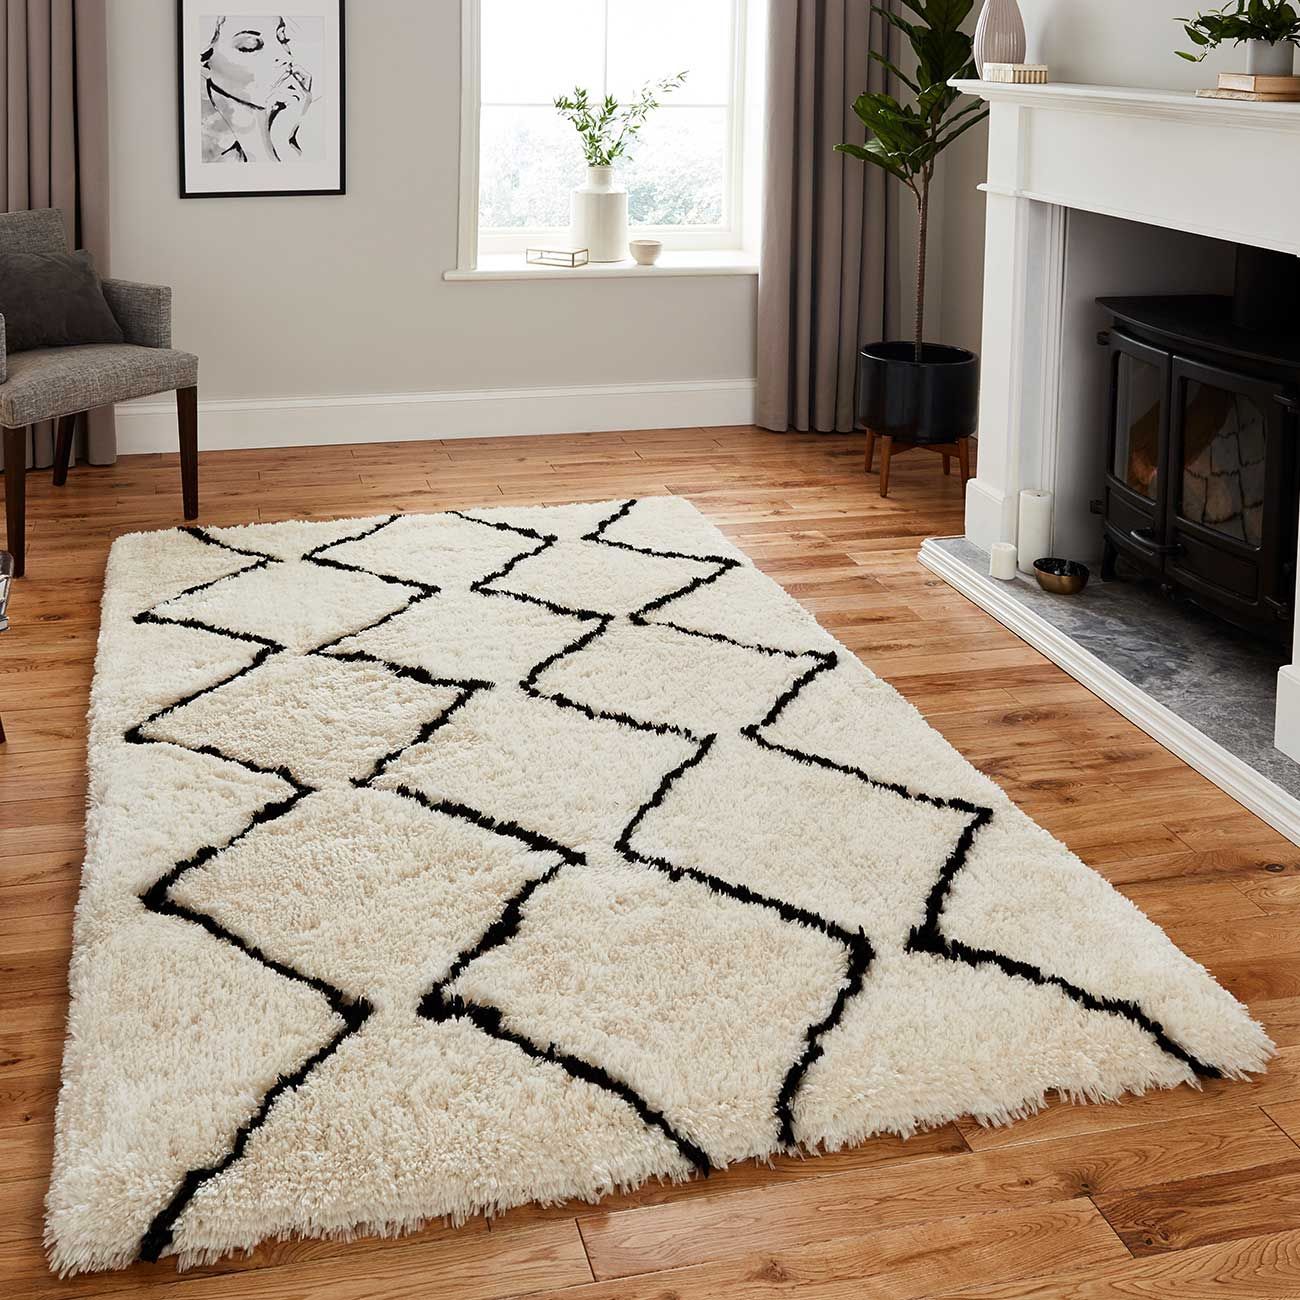 Buy Online Think Rugs Morocco 3742 Ivory/black Shaggy Rug – Therugshopuk Within Ivory And Black Rugs (View 10 of 15)